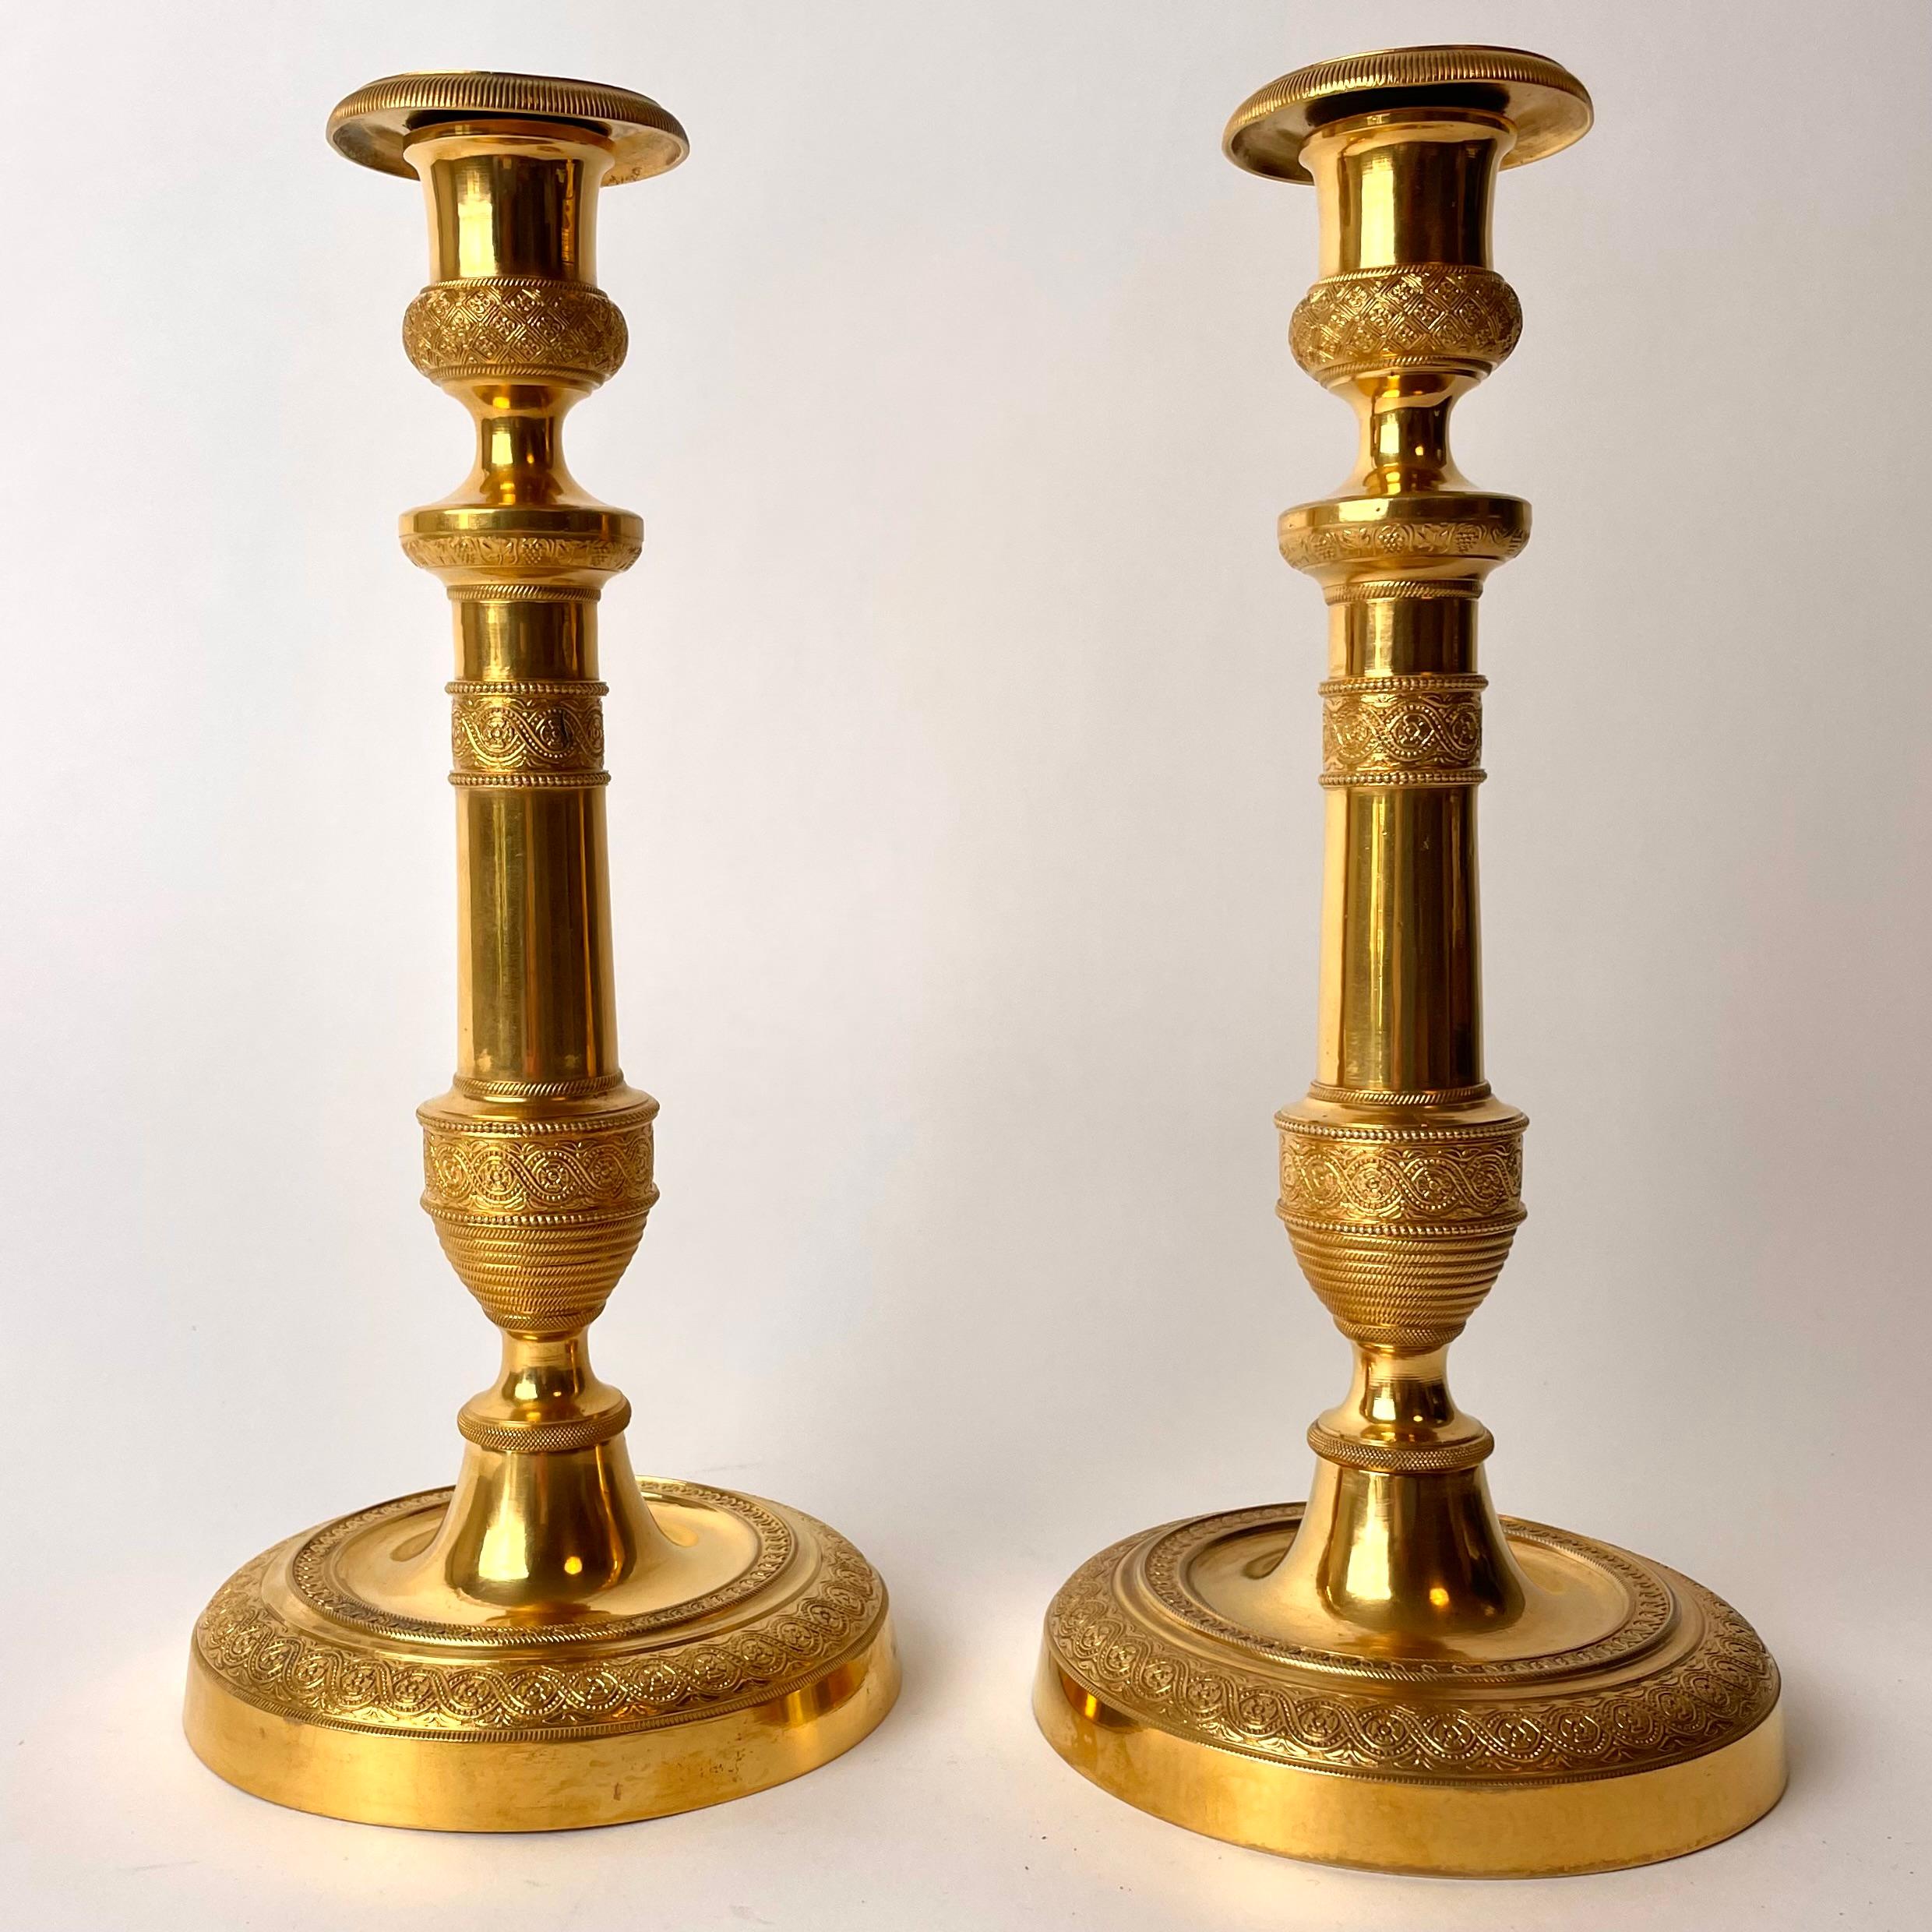 A pair of Large and Sophisticated Empire Candlesticks. Made in France during the 1820s. Very good original gilding and beautiful decoration of these large candlesticks. 


Wear consistent with age and use.